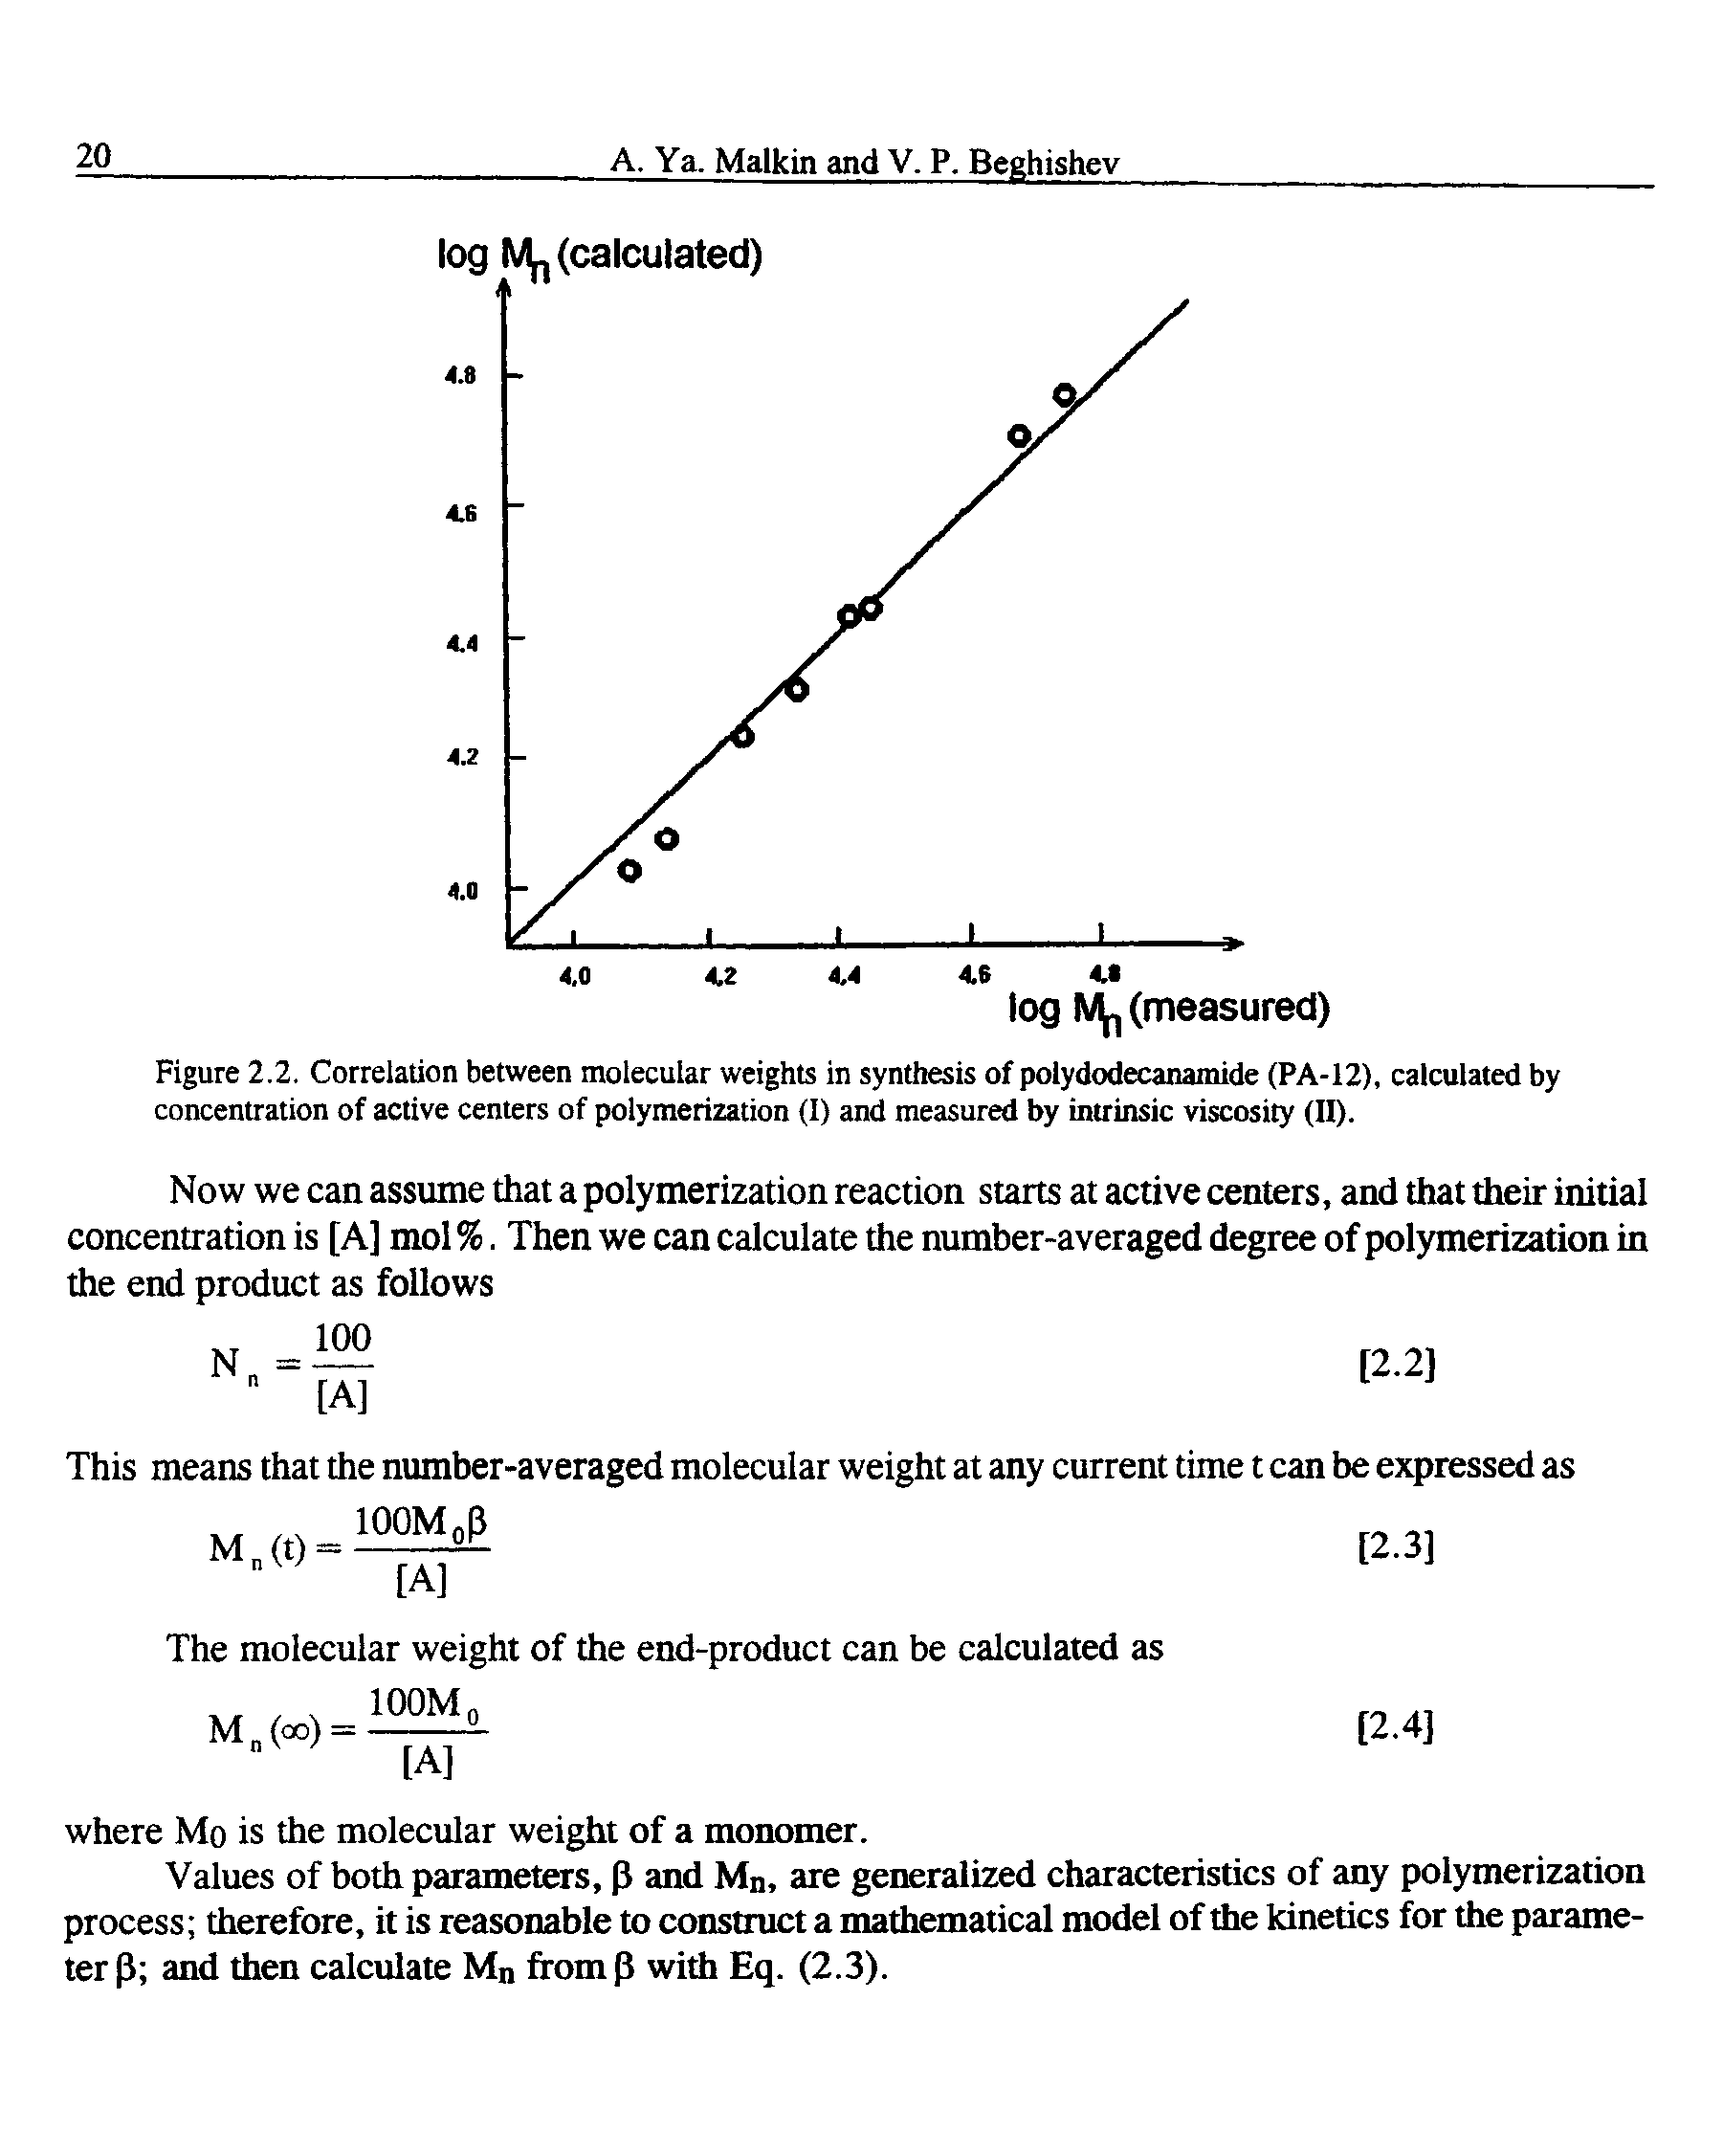 Figure 2.2. Correlation between molecular weights in synthesis of polydodecanamide (PA-12), calculated by concentration of active centers of polymerization (I) and measured by intrinsic viscosity (II).